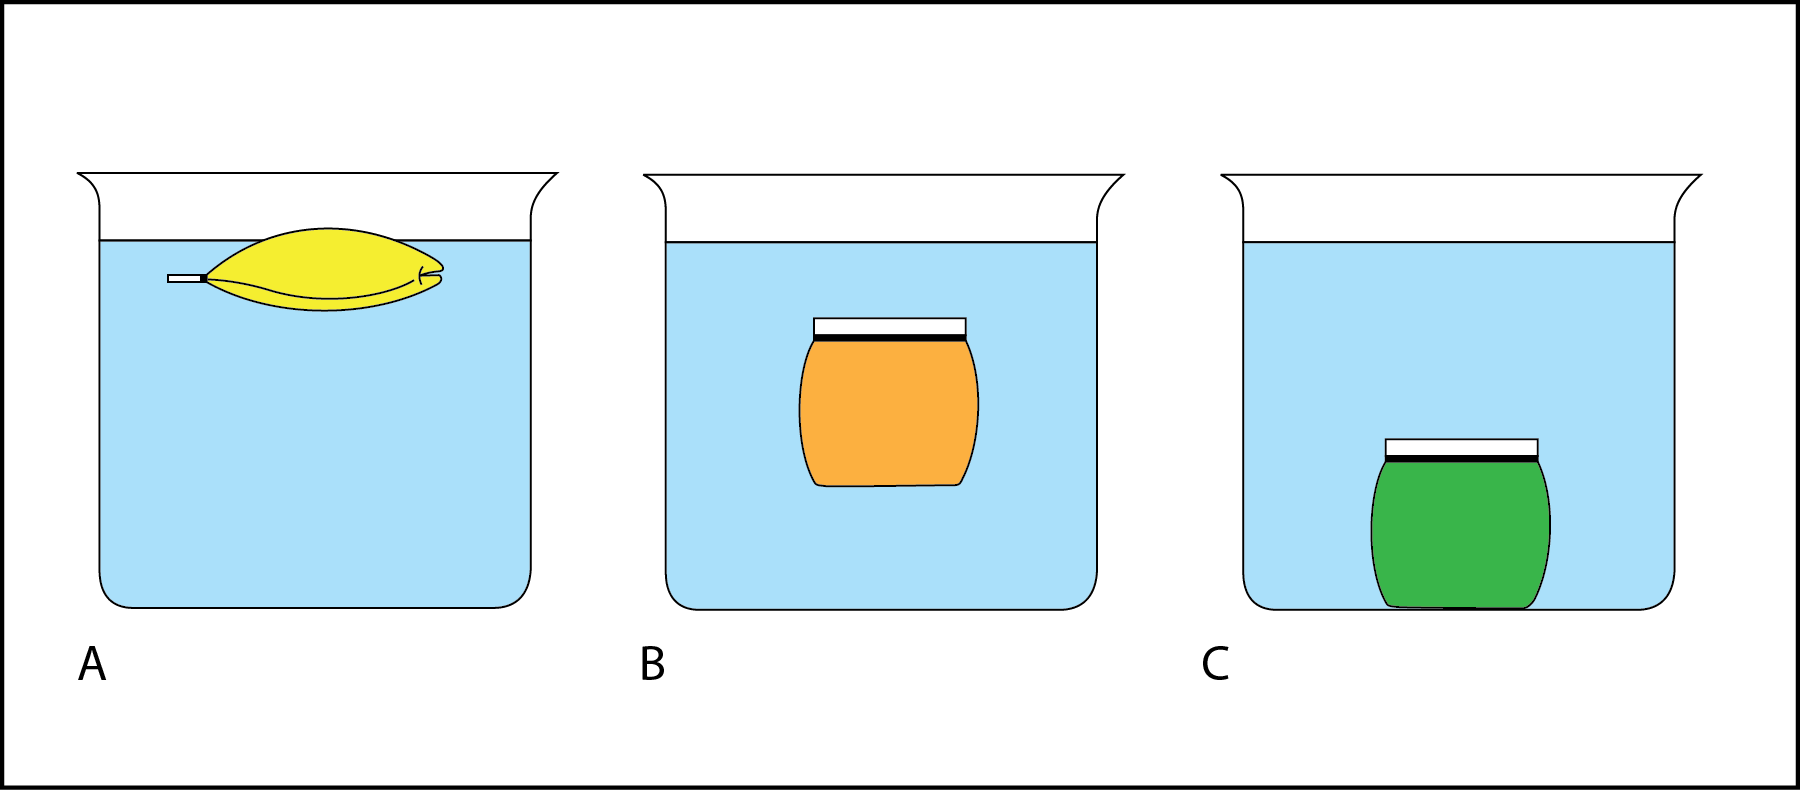 <p><strong>Fig. 2.3. </strong>(<strong>A</strong>) The bag filled with yellow liquid is floating on the surface. (<strong>B</strong>) The bag filled with orange liquid is floating in mid-water (subsurface floating). (<strong>C</strong>) The bag filled with green liquid has sunk to the bottom of the beaker.</p>